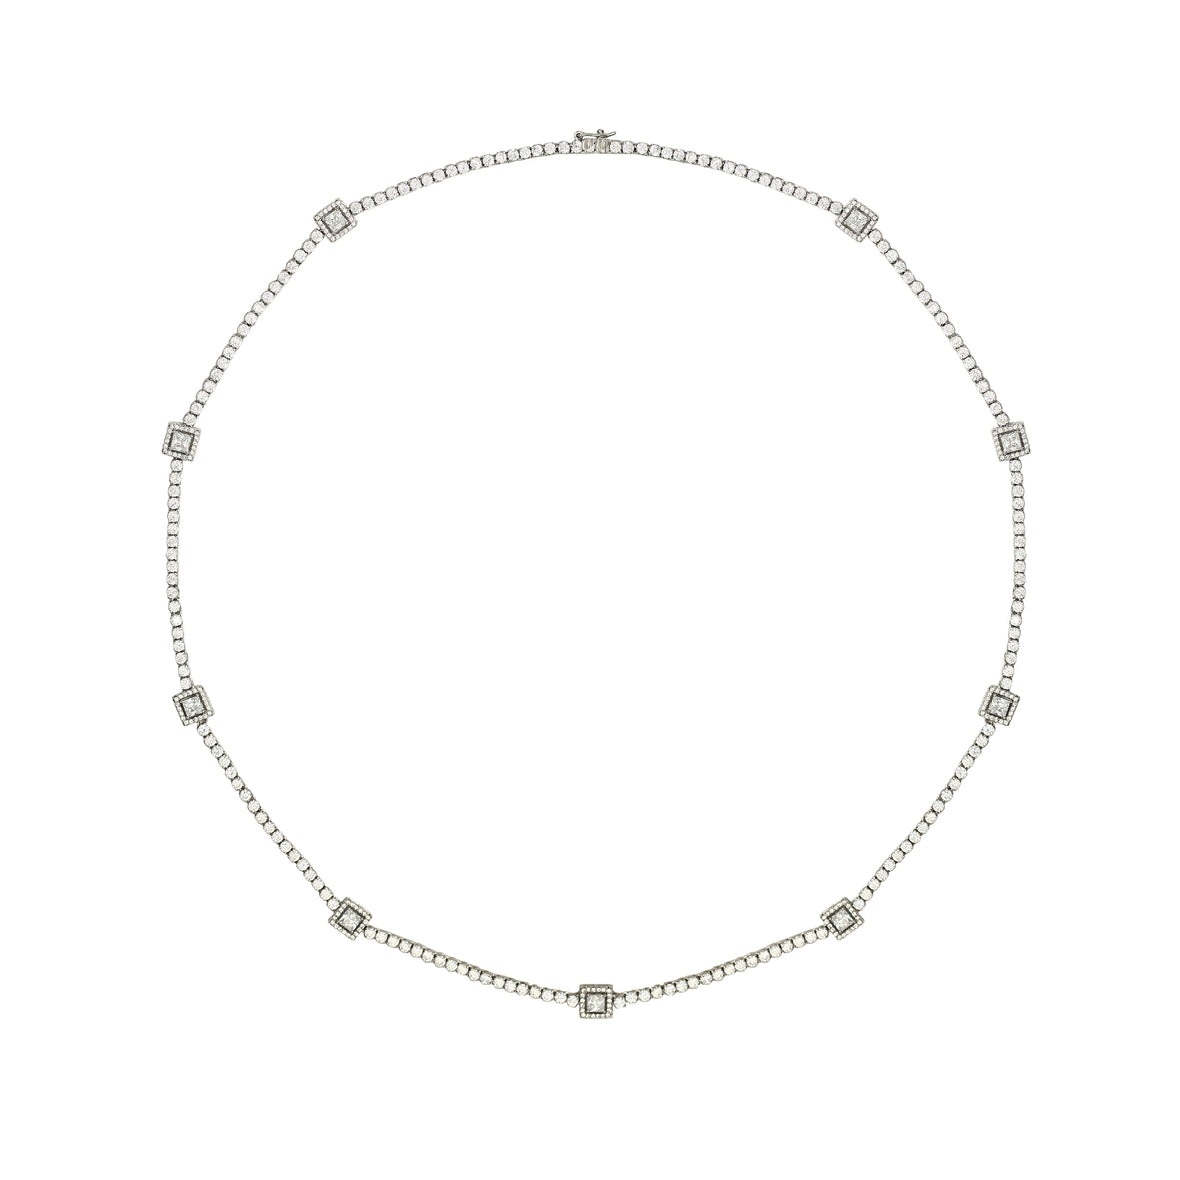 Philippa White Long Tennis Necklace